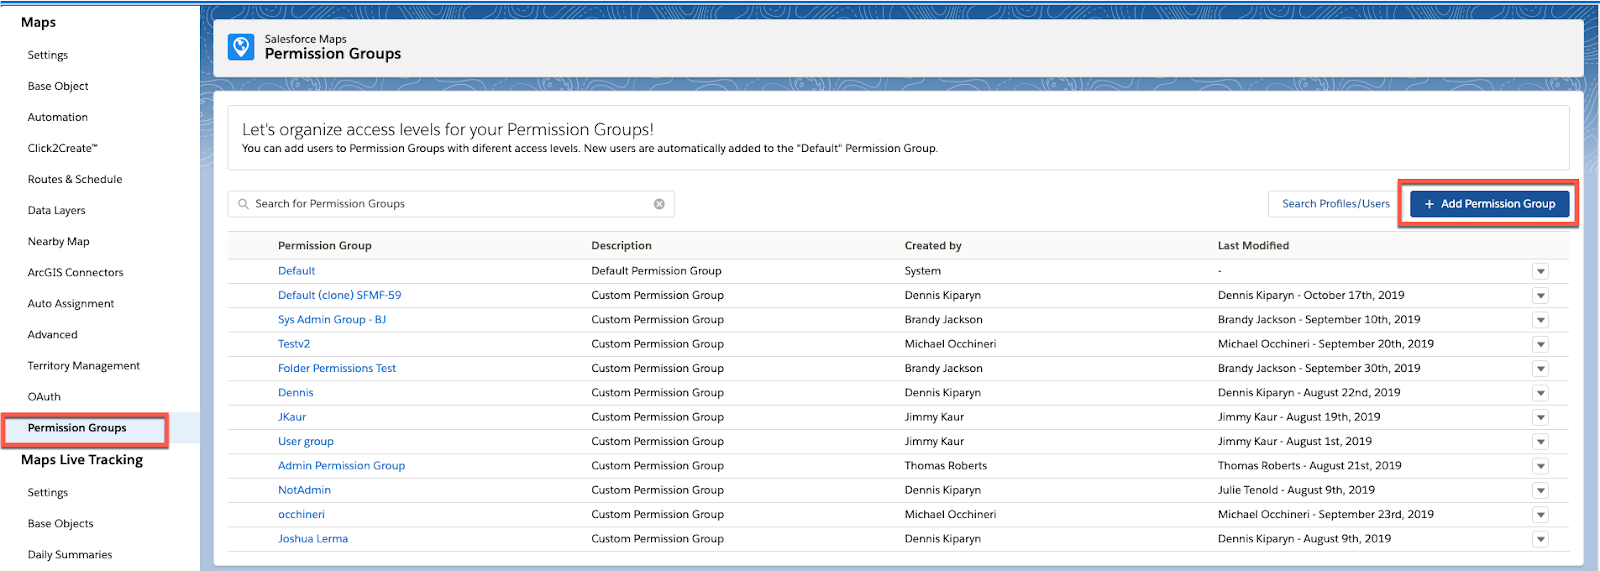 Screenshot shows the Salesforce Maps Permission Groups page and highlights the Add Permission Group button.